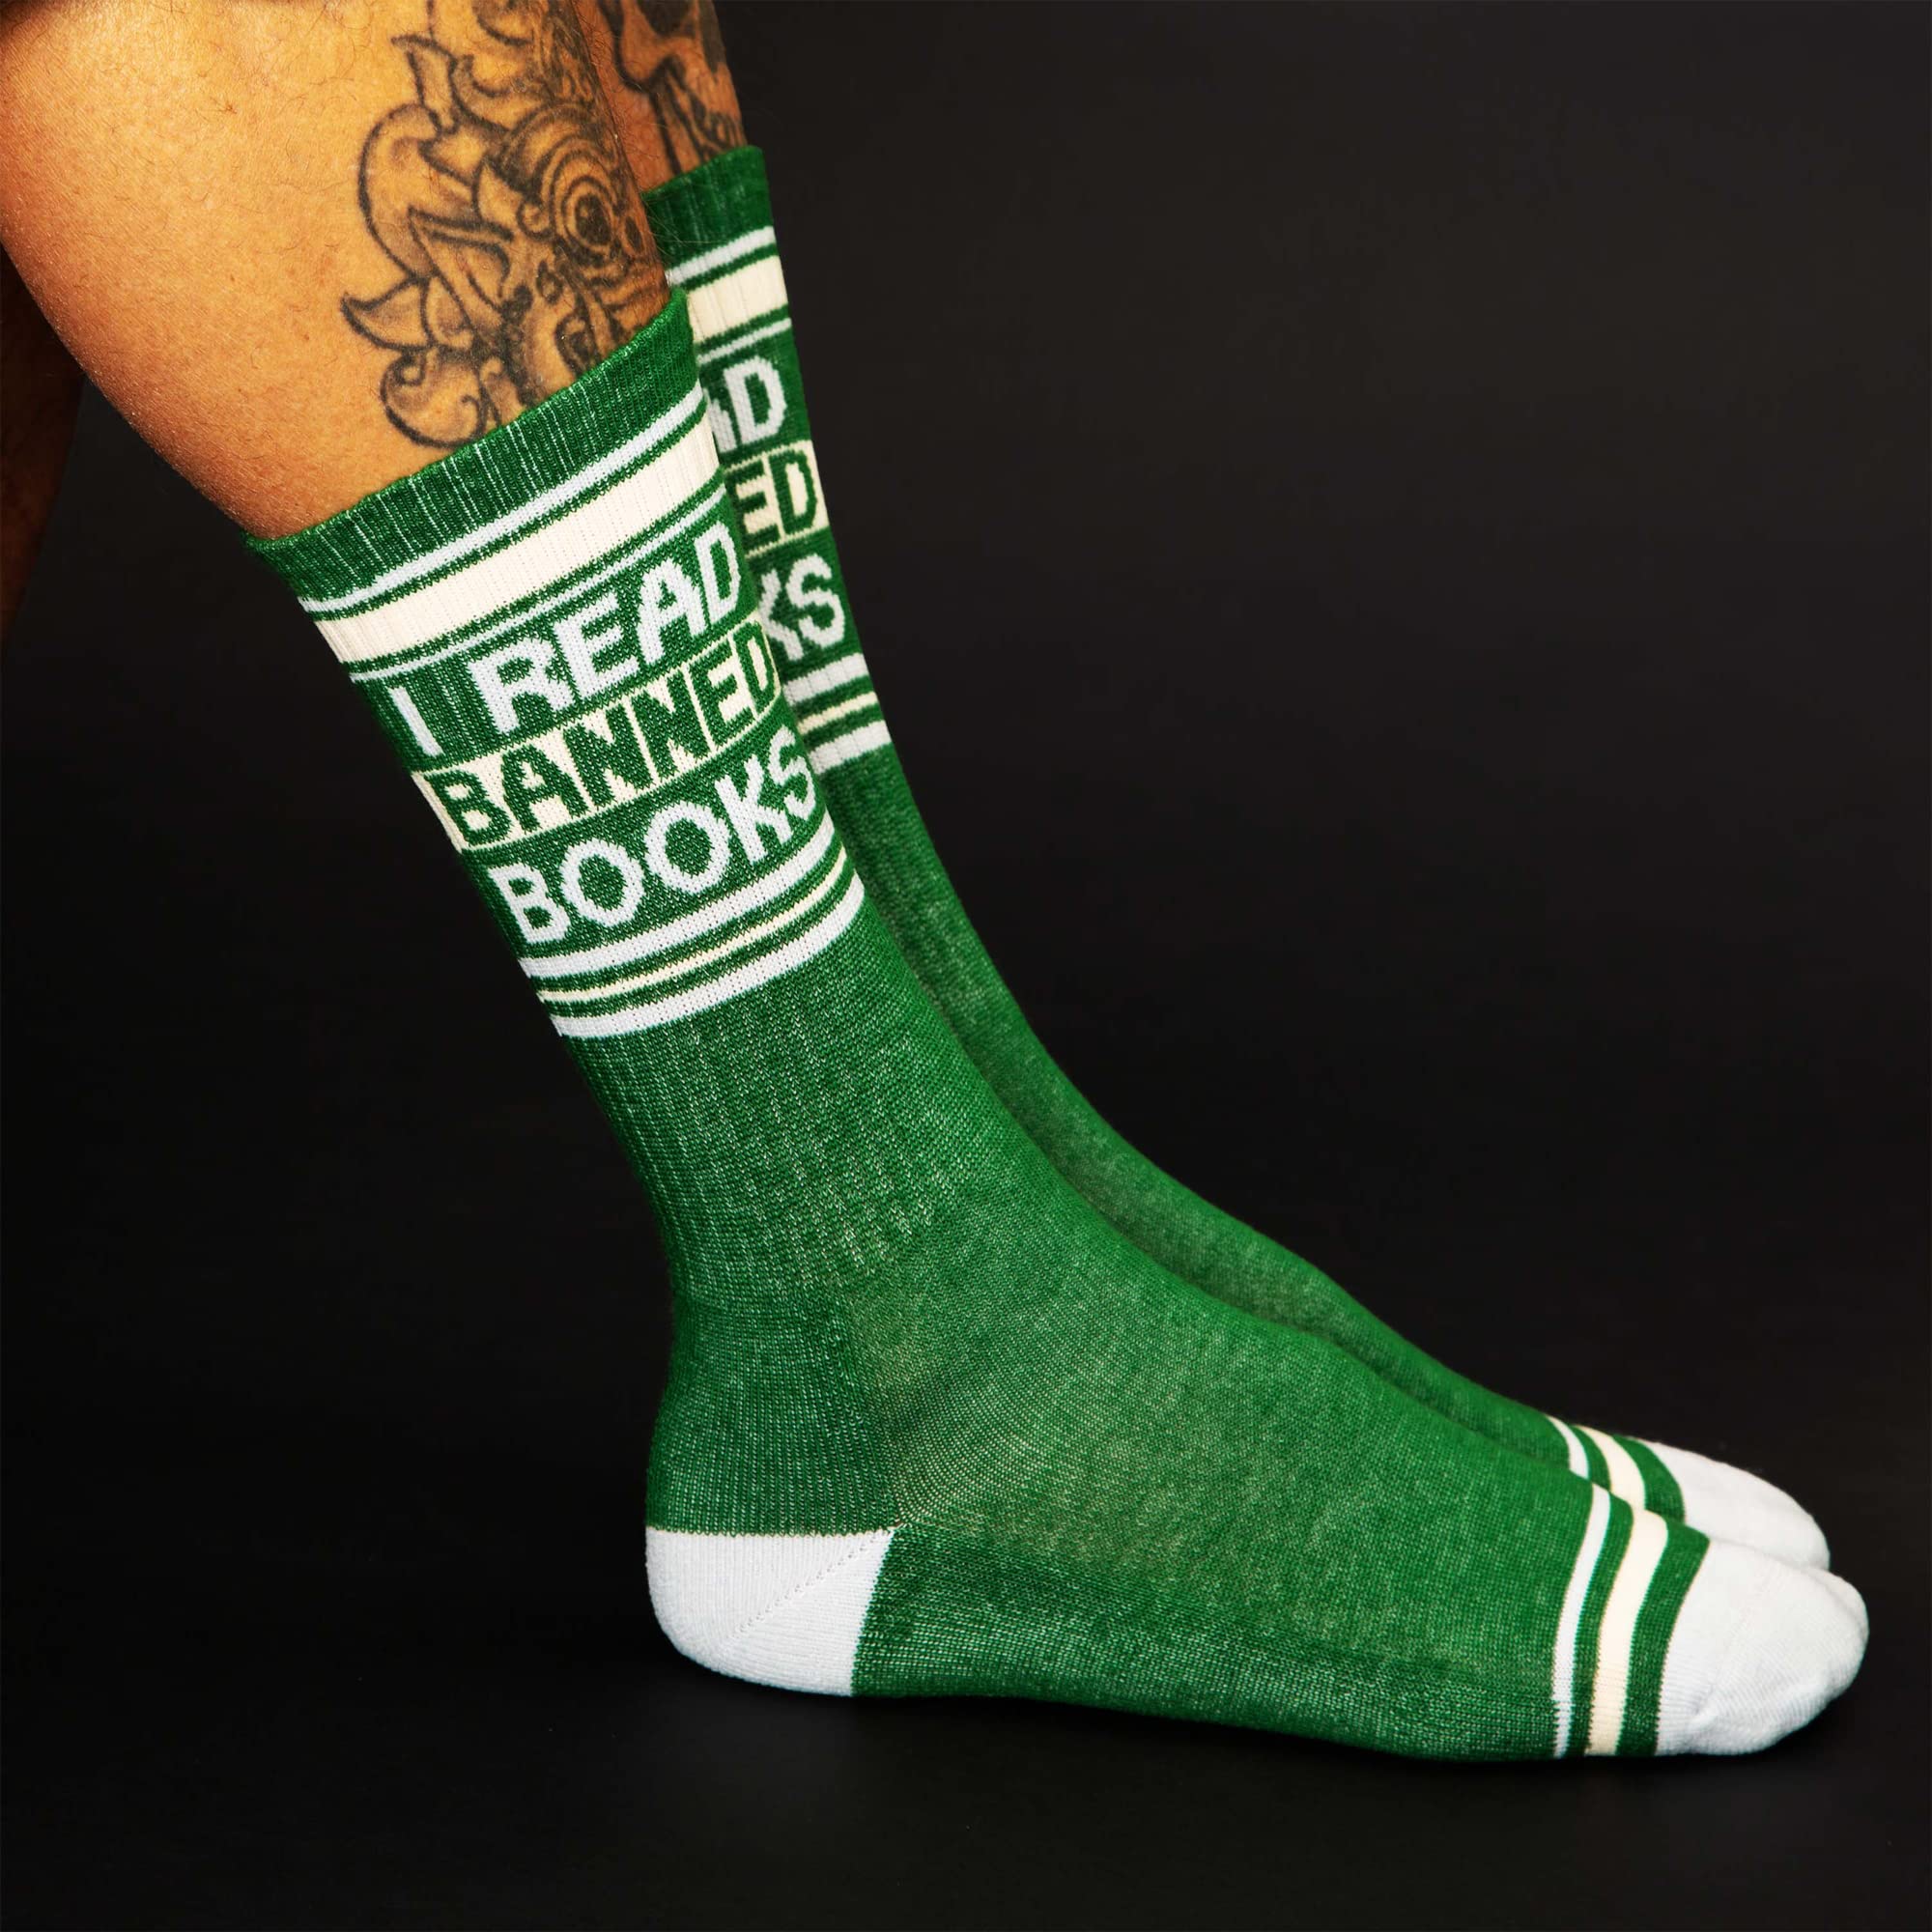 Gumball Poodle I READ BANNED BOOKS, Unisex Gym Socks